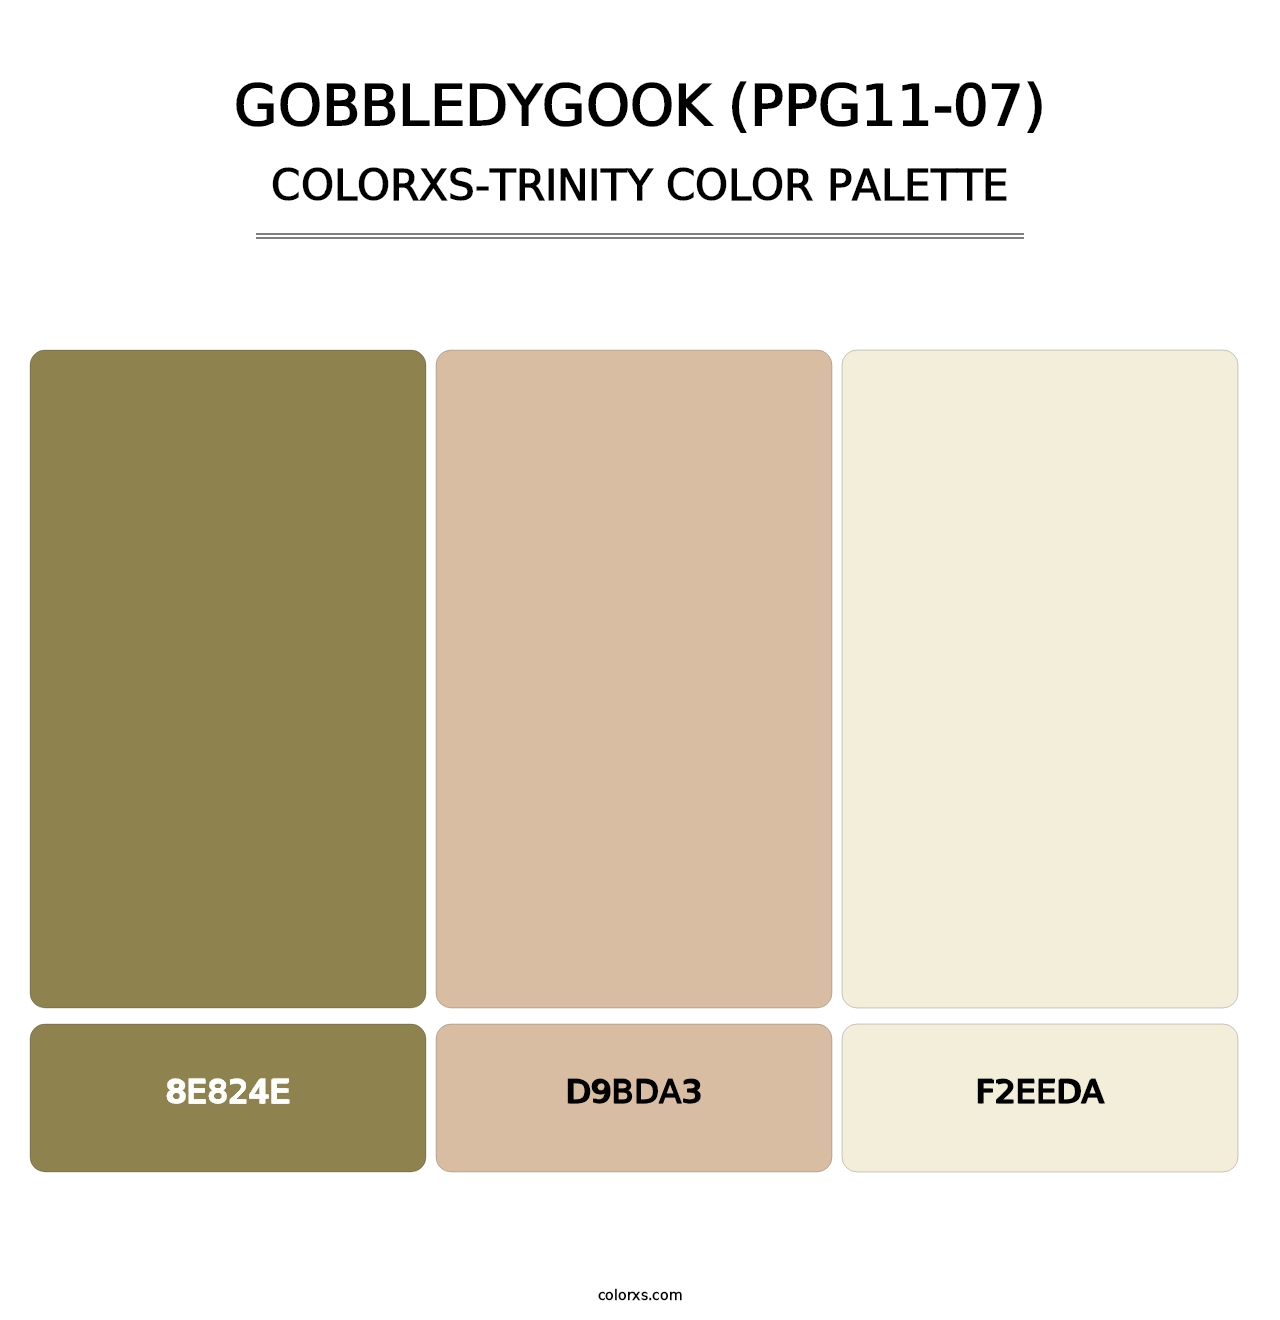 Gobbledygook (PPG11-07) - Colorxs Trinity Palette